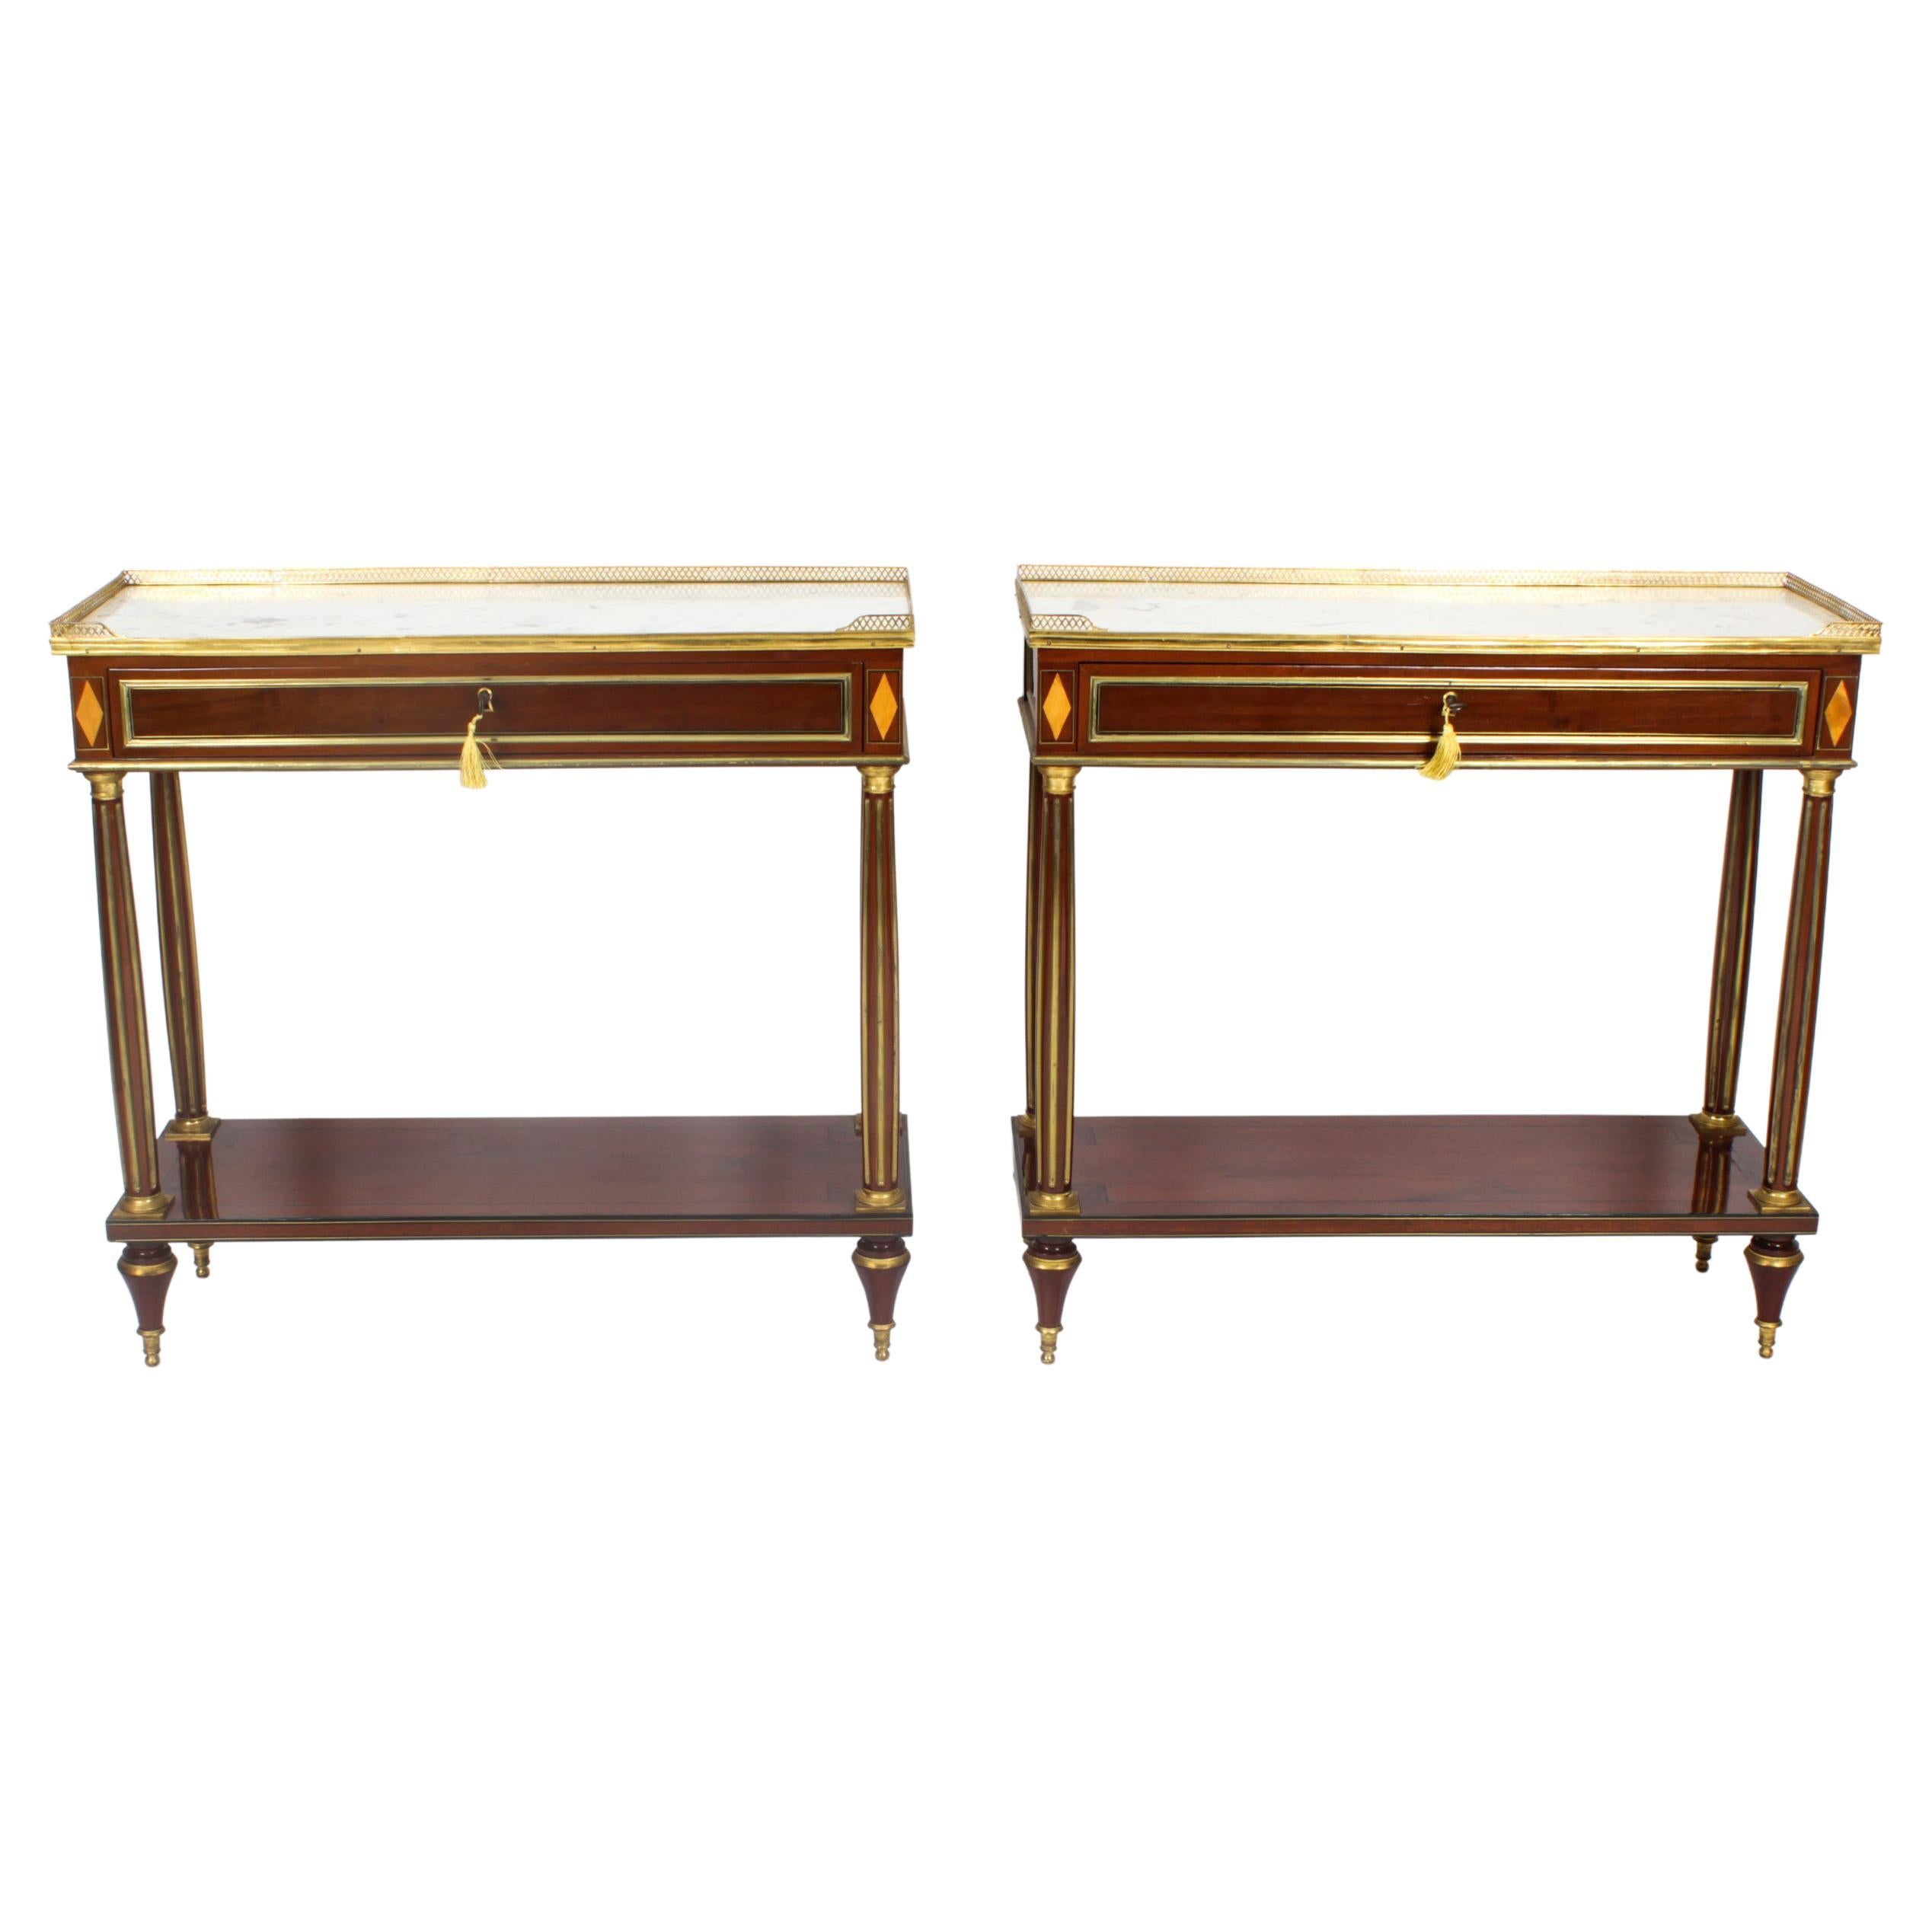 Antique Pair Russian Ormolu Mounted Console Tables, 19th Century